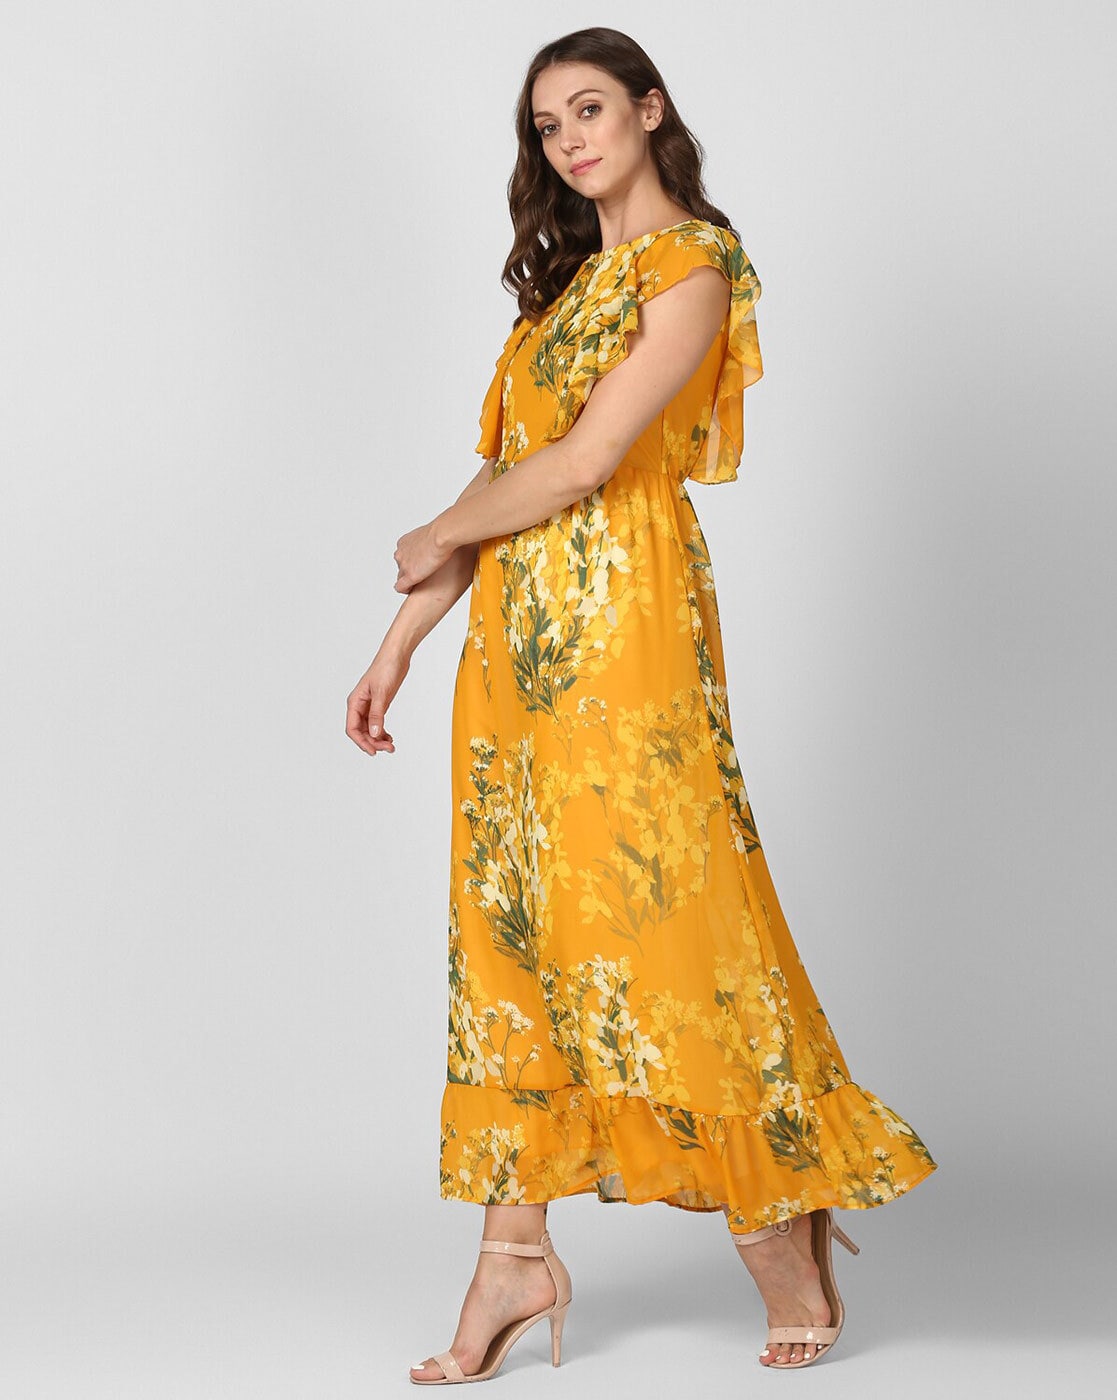 Summer Dress under 570 Rs. from Ajio @ajiolife @masakali.india  @shopmasakali.co Comment down or DM for dress link… | … | Dress link,  Summer dresses, Instagram photo